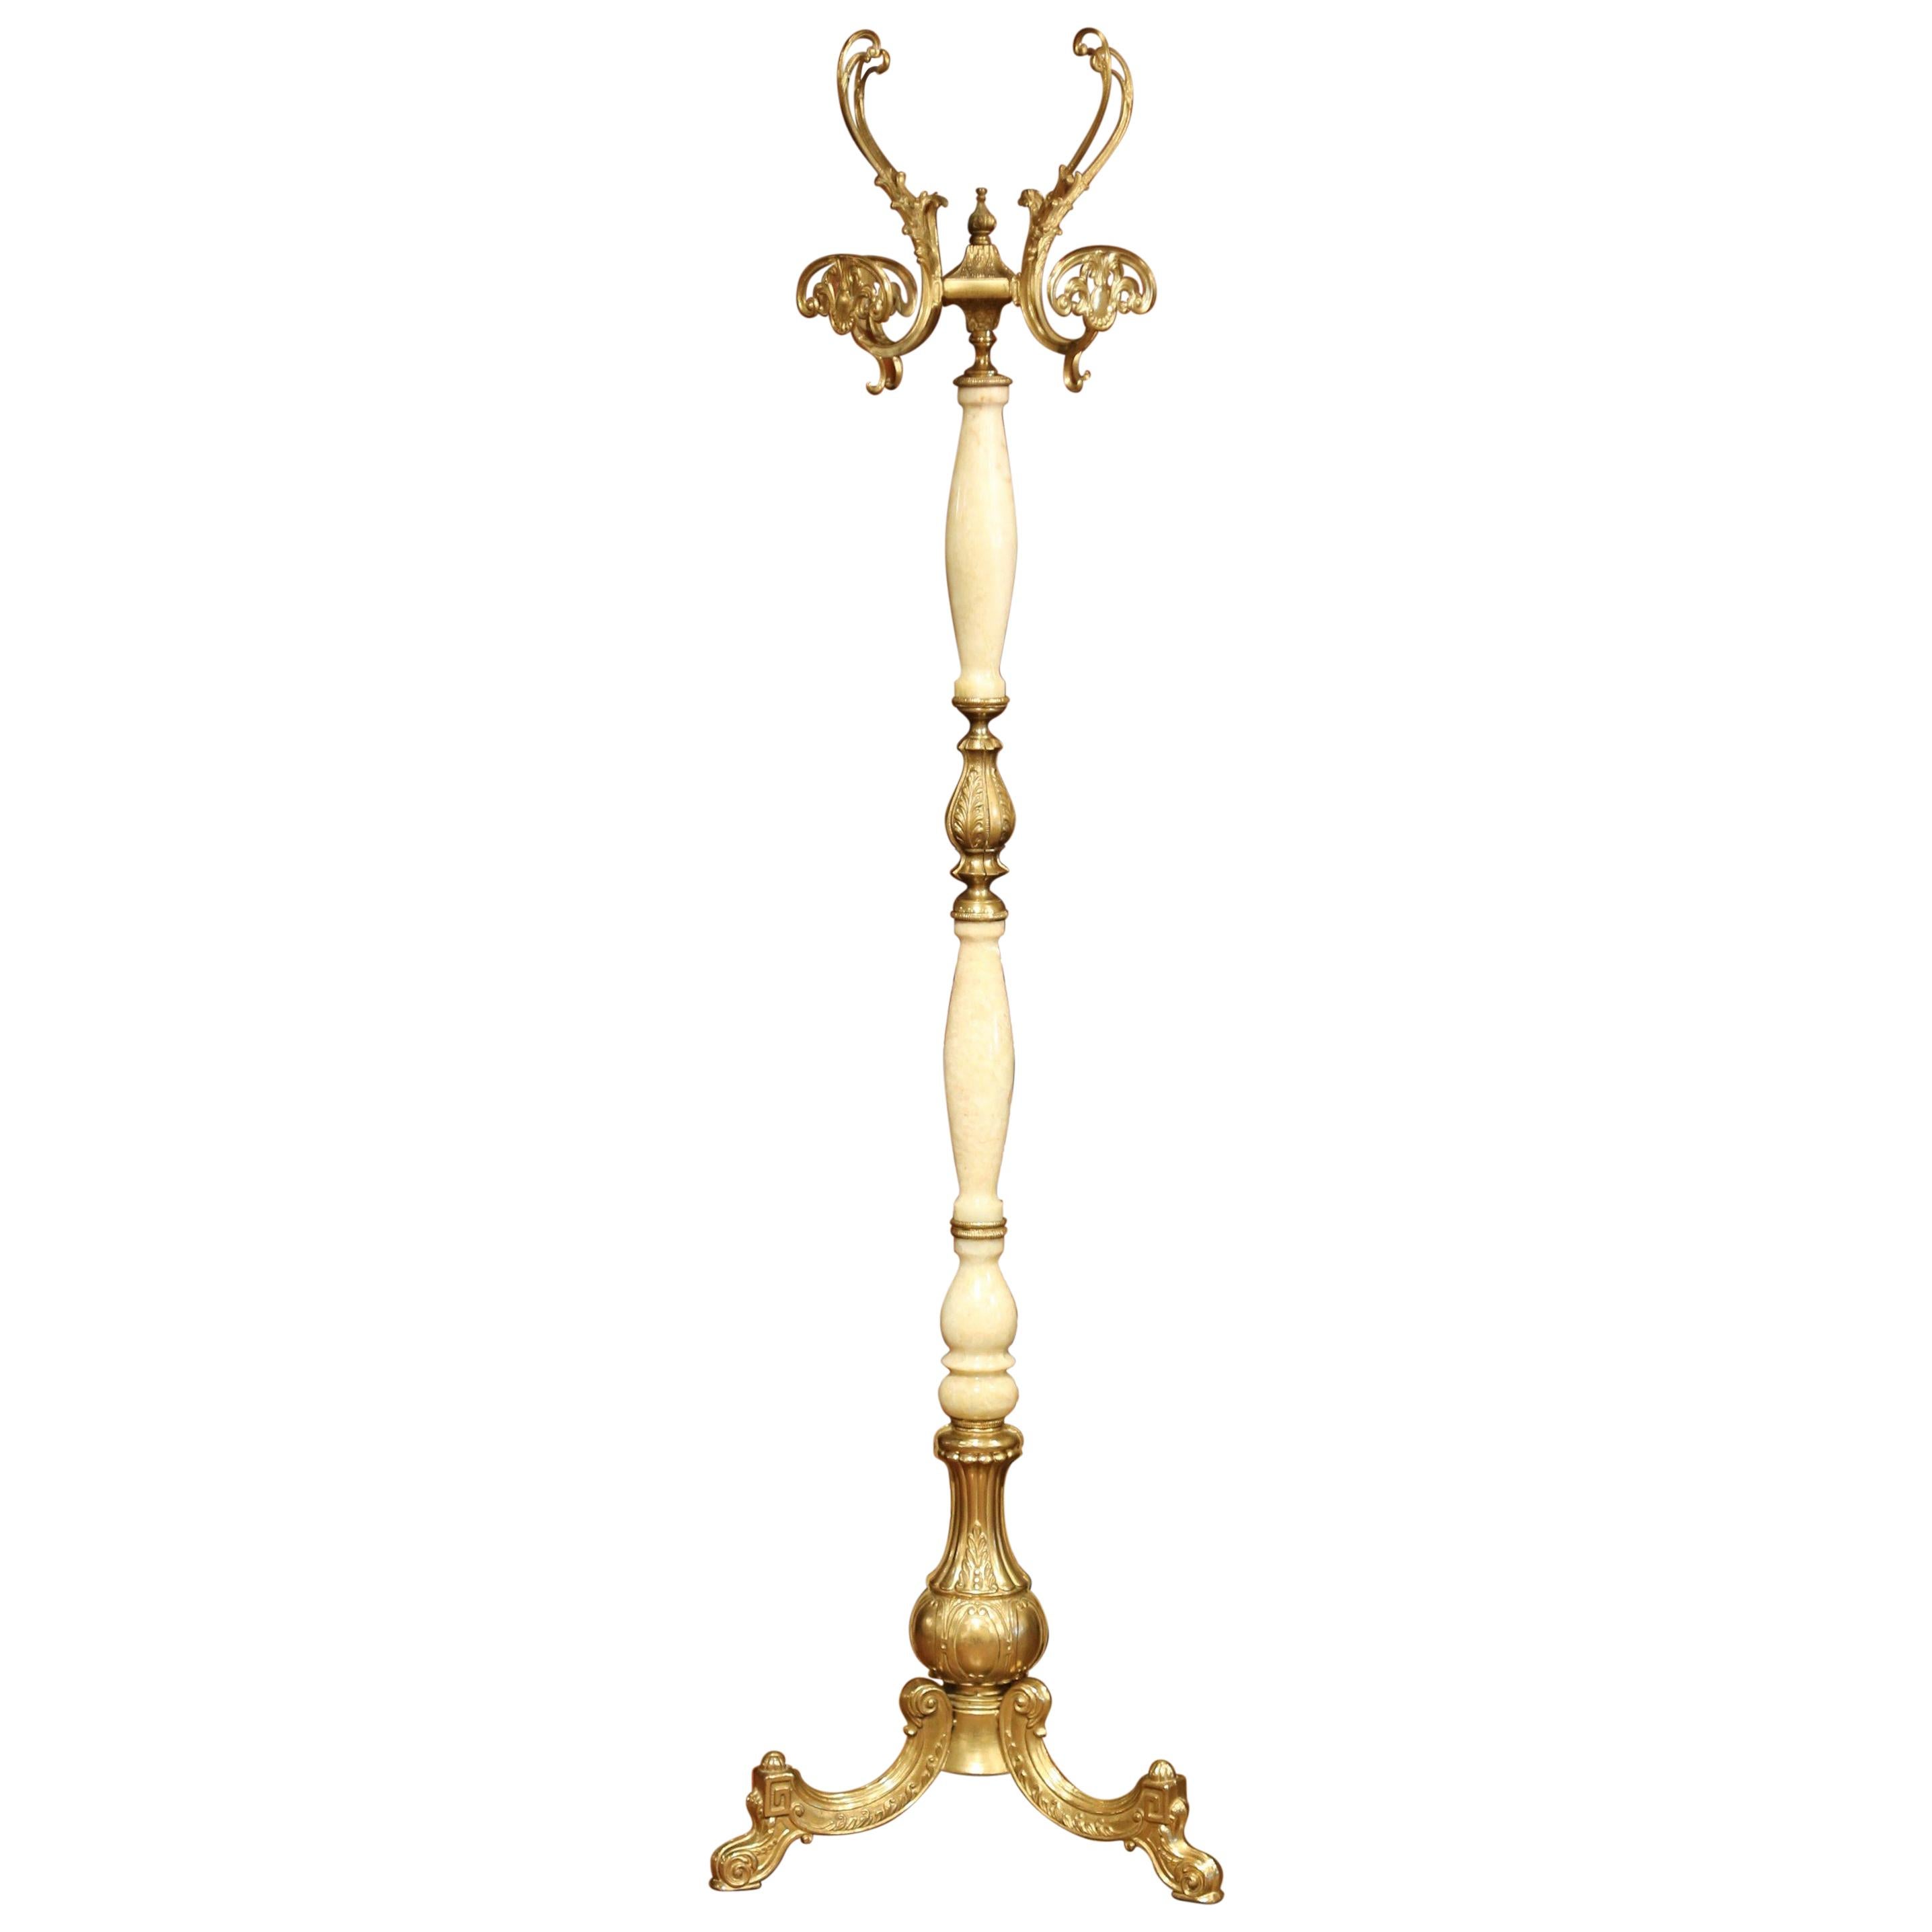 Midcentury Free Standing Ornate Onyx and Brass Coat Stand